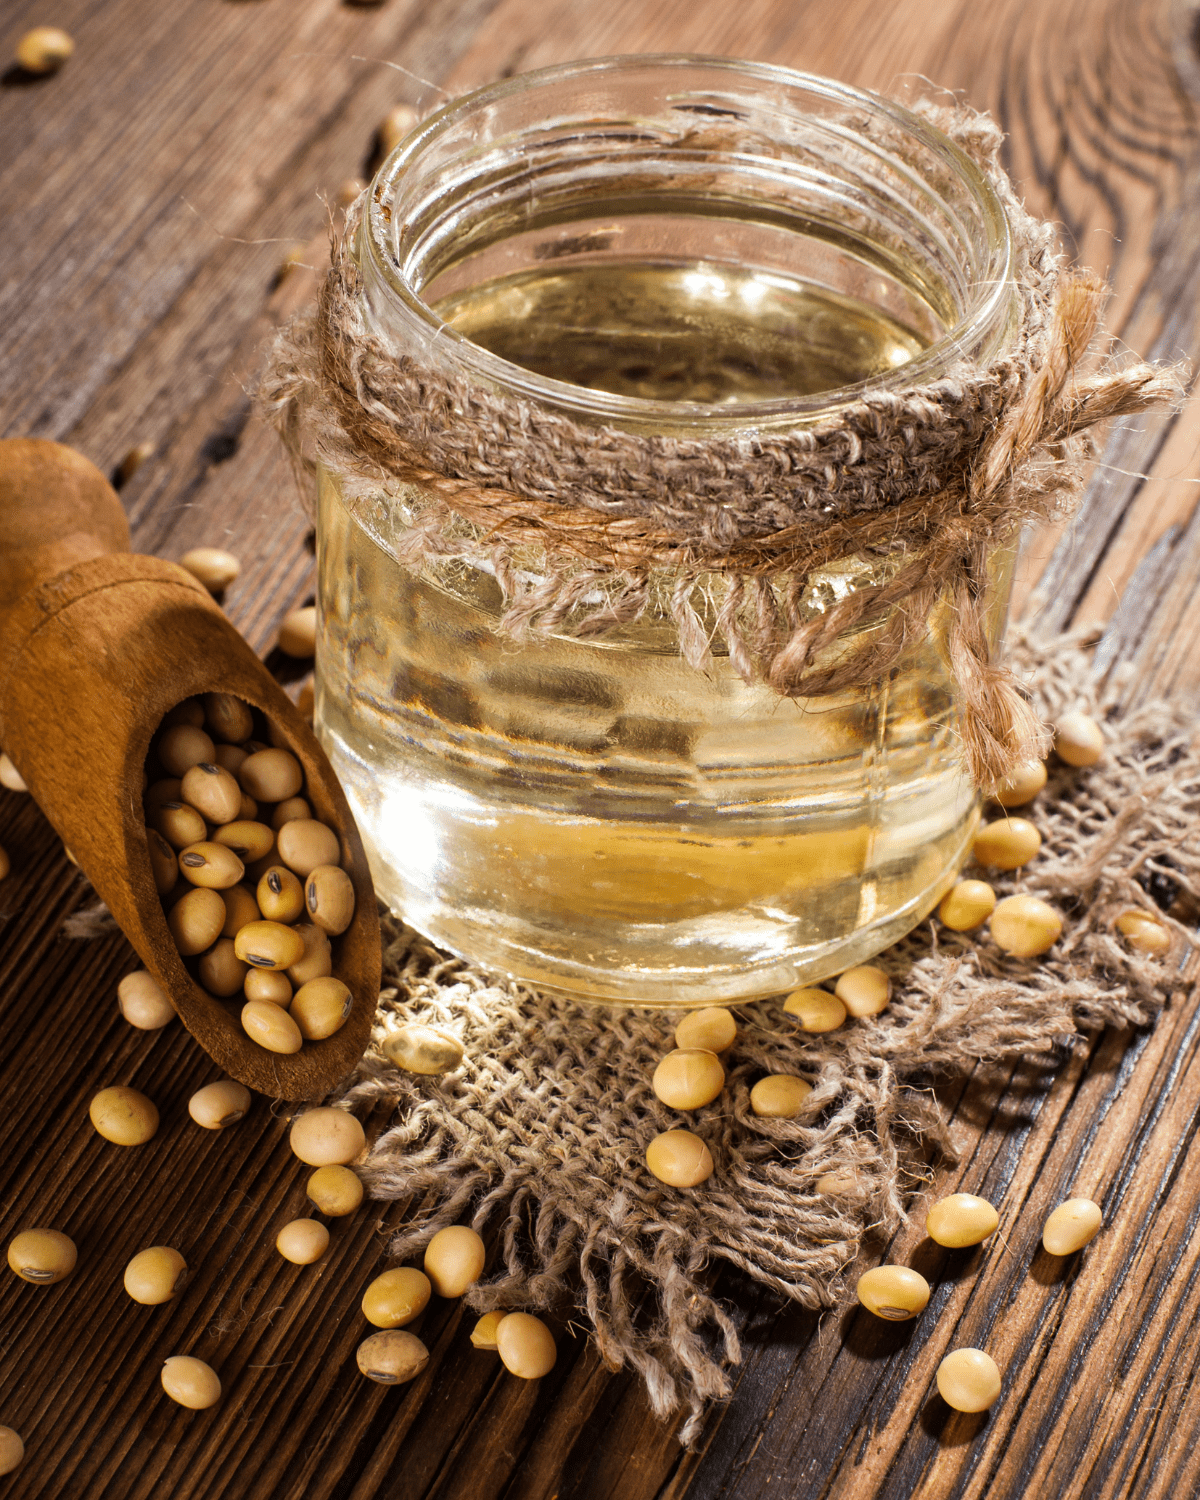 Small glass jar of soybean oil, with dried soybeans around the bottle and a wooden spoon.